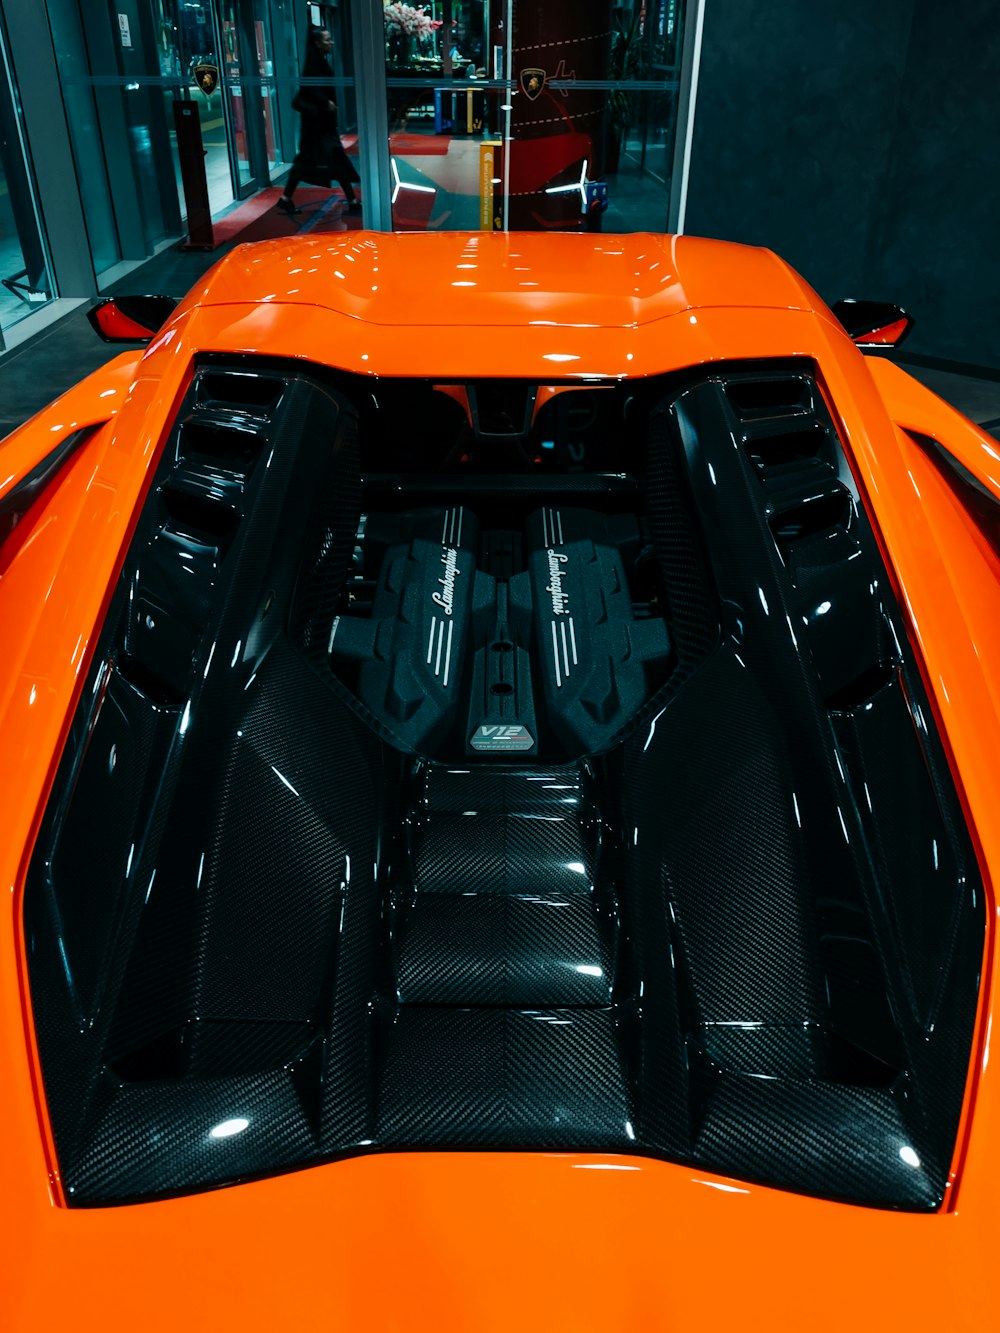 a close up of the hood of an orange sports car